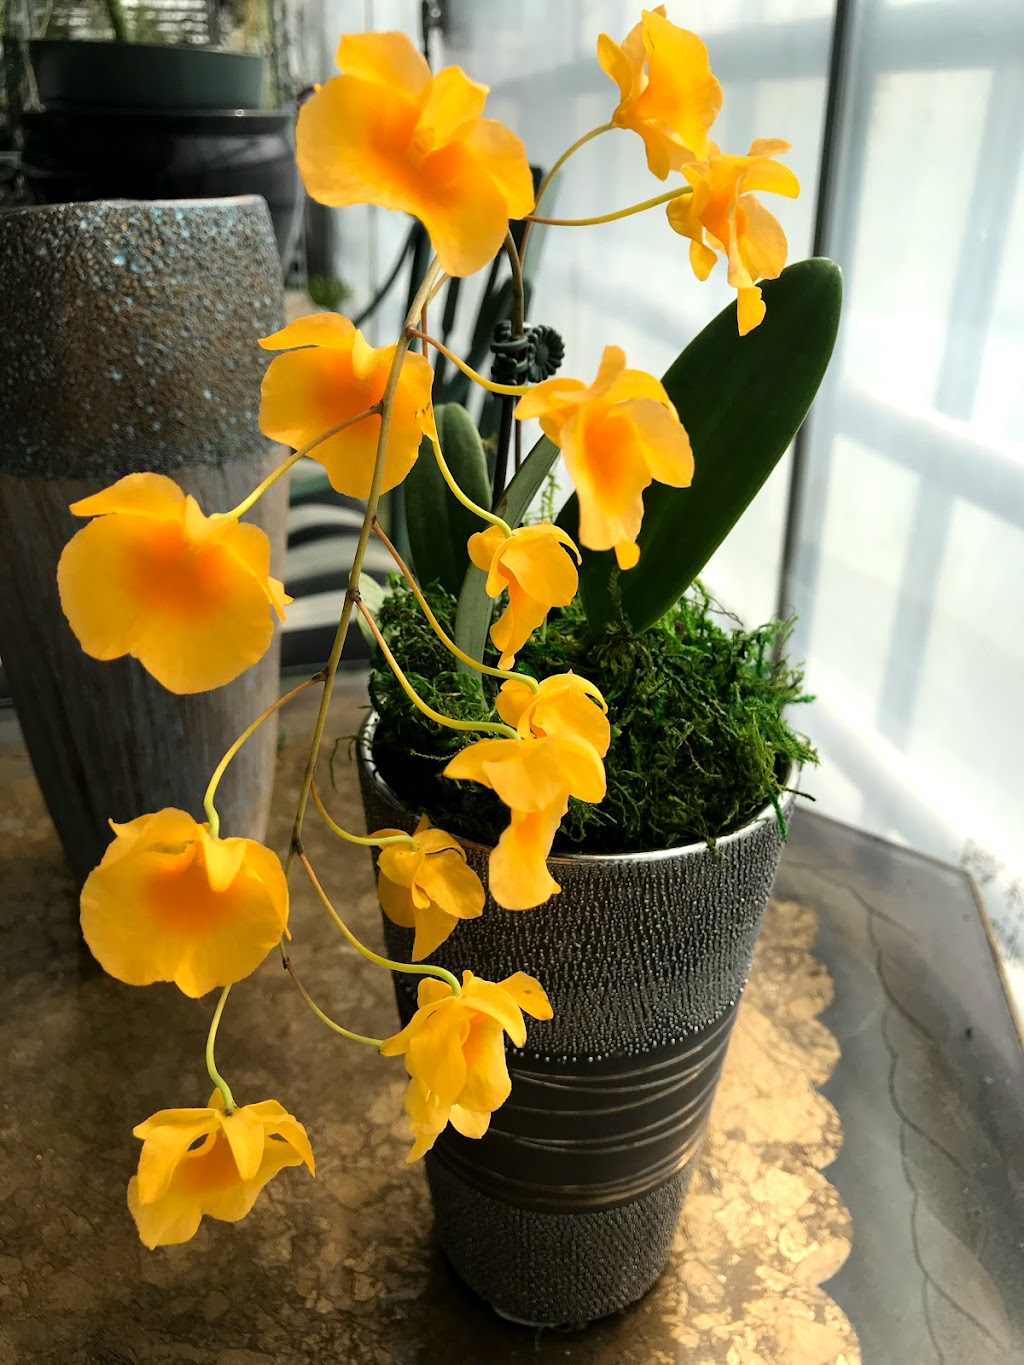 White Plains Orchids, Orchid Farm and Shop | 1485 Mamaroneck Ave, White Plains, NY 10605 | Phone: (914) 948-2064